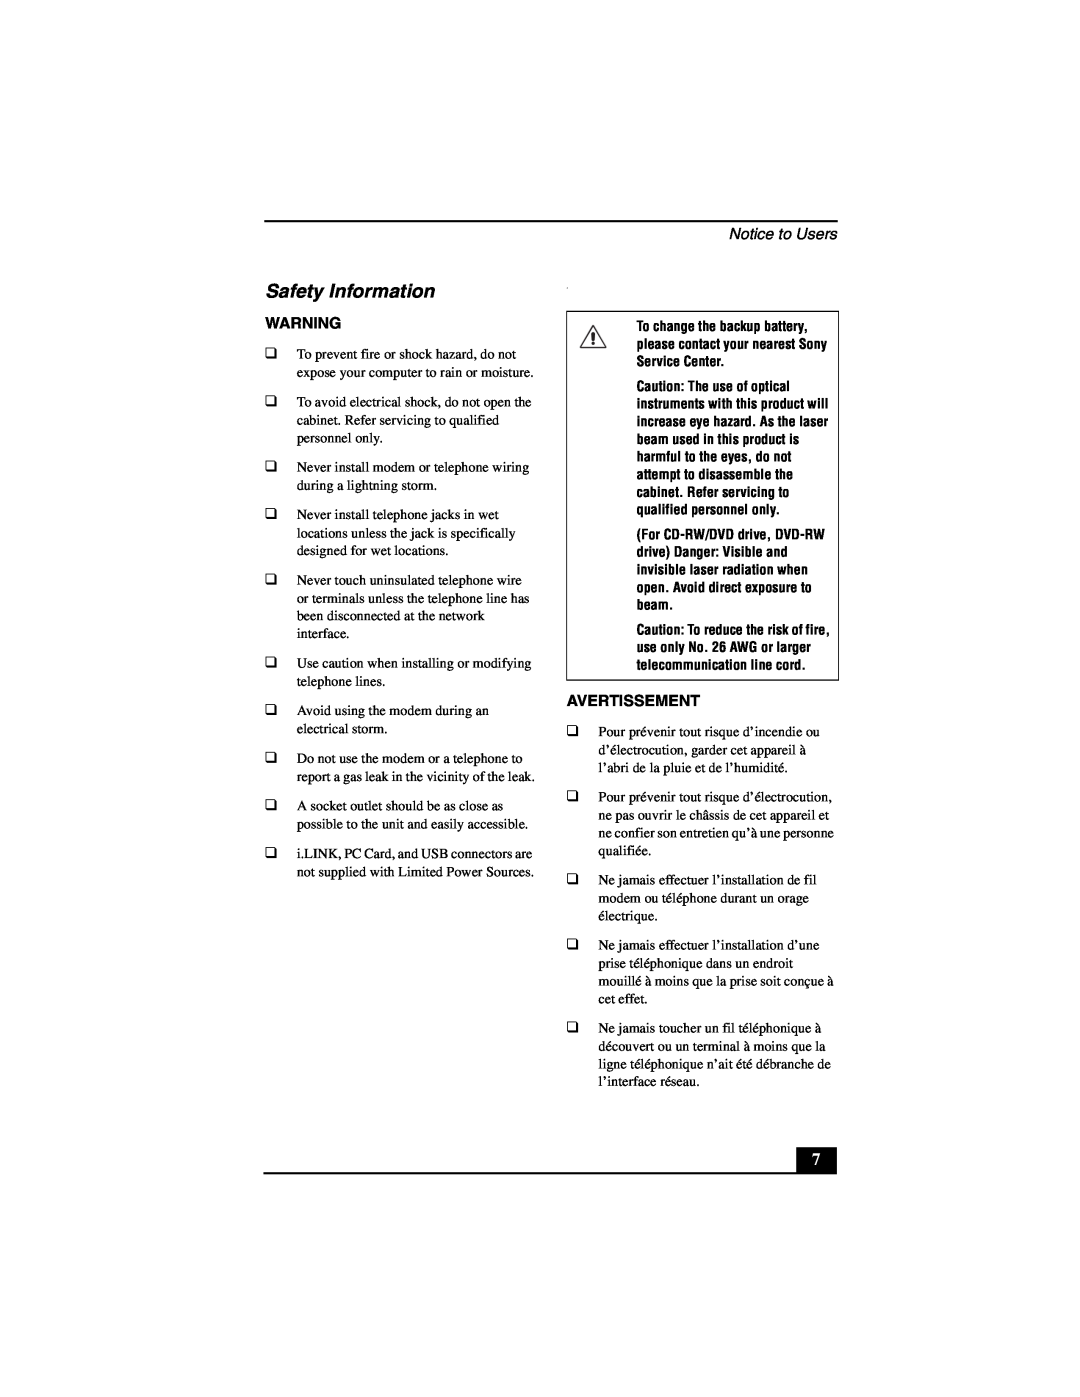 Sony PCG-NV200 quick start Safety Information, Notice to Users, Avertissement 